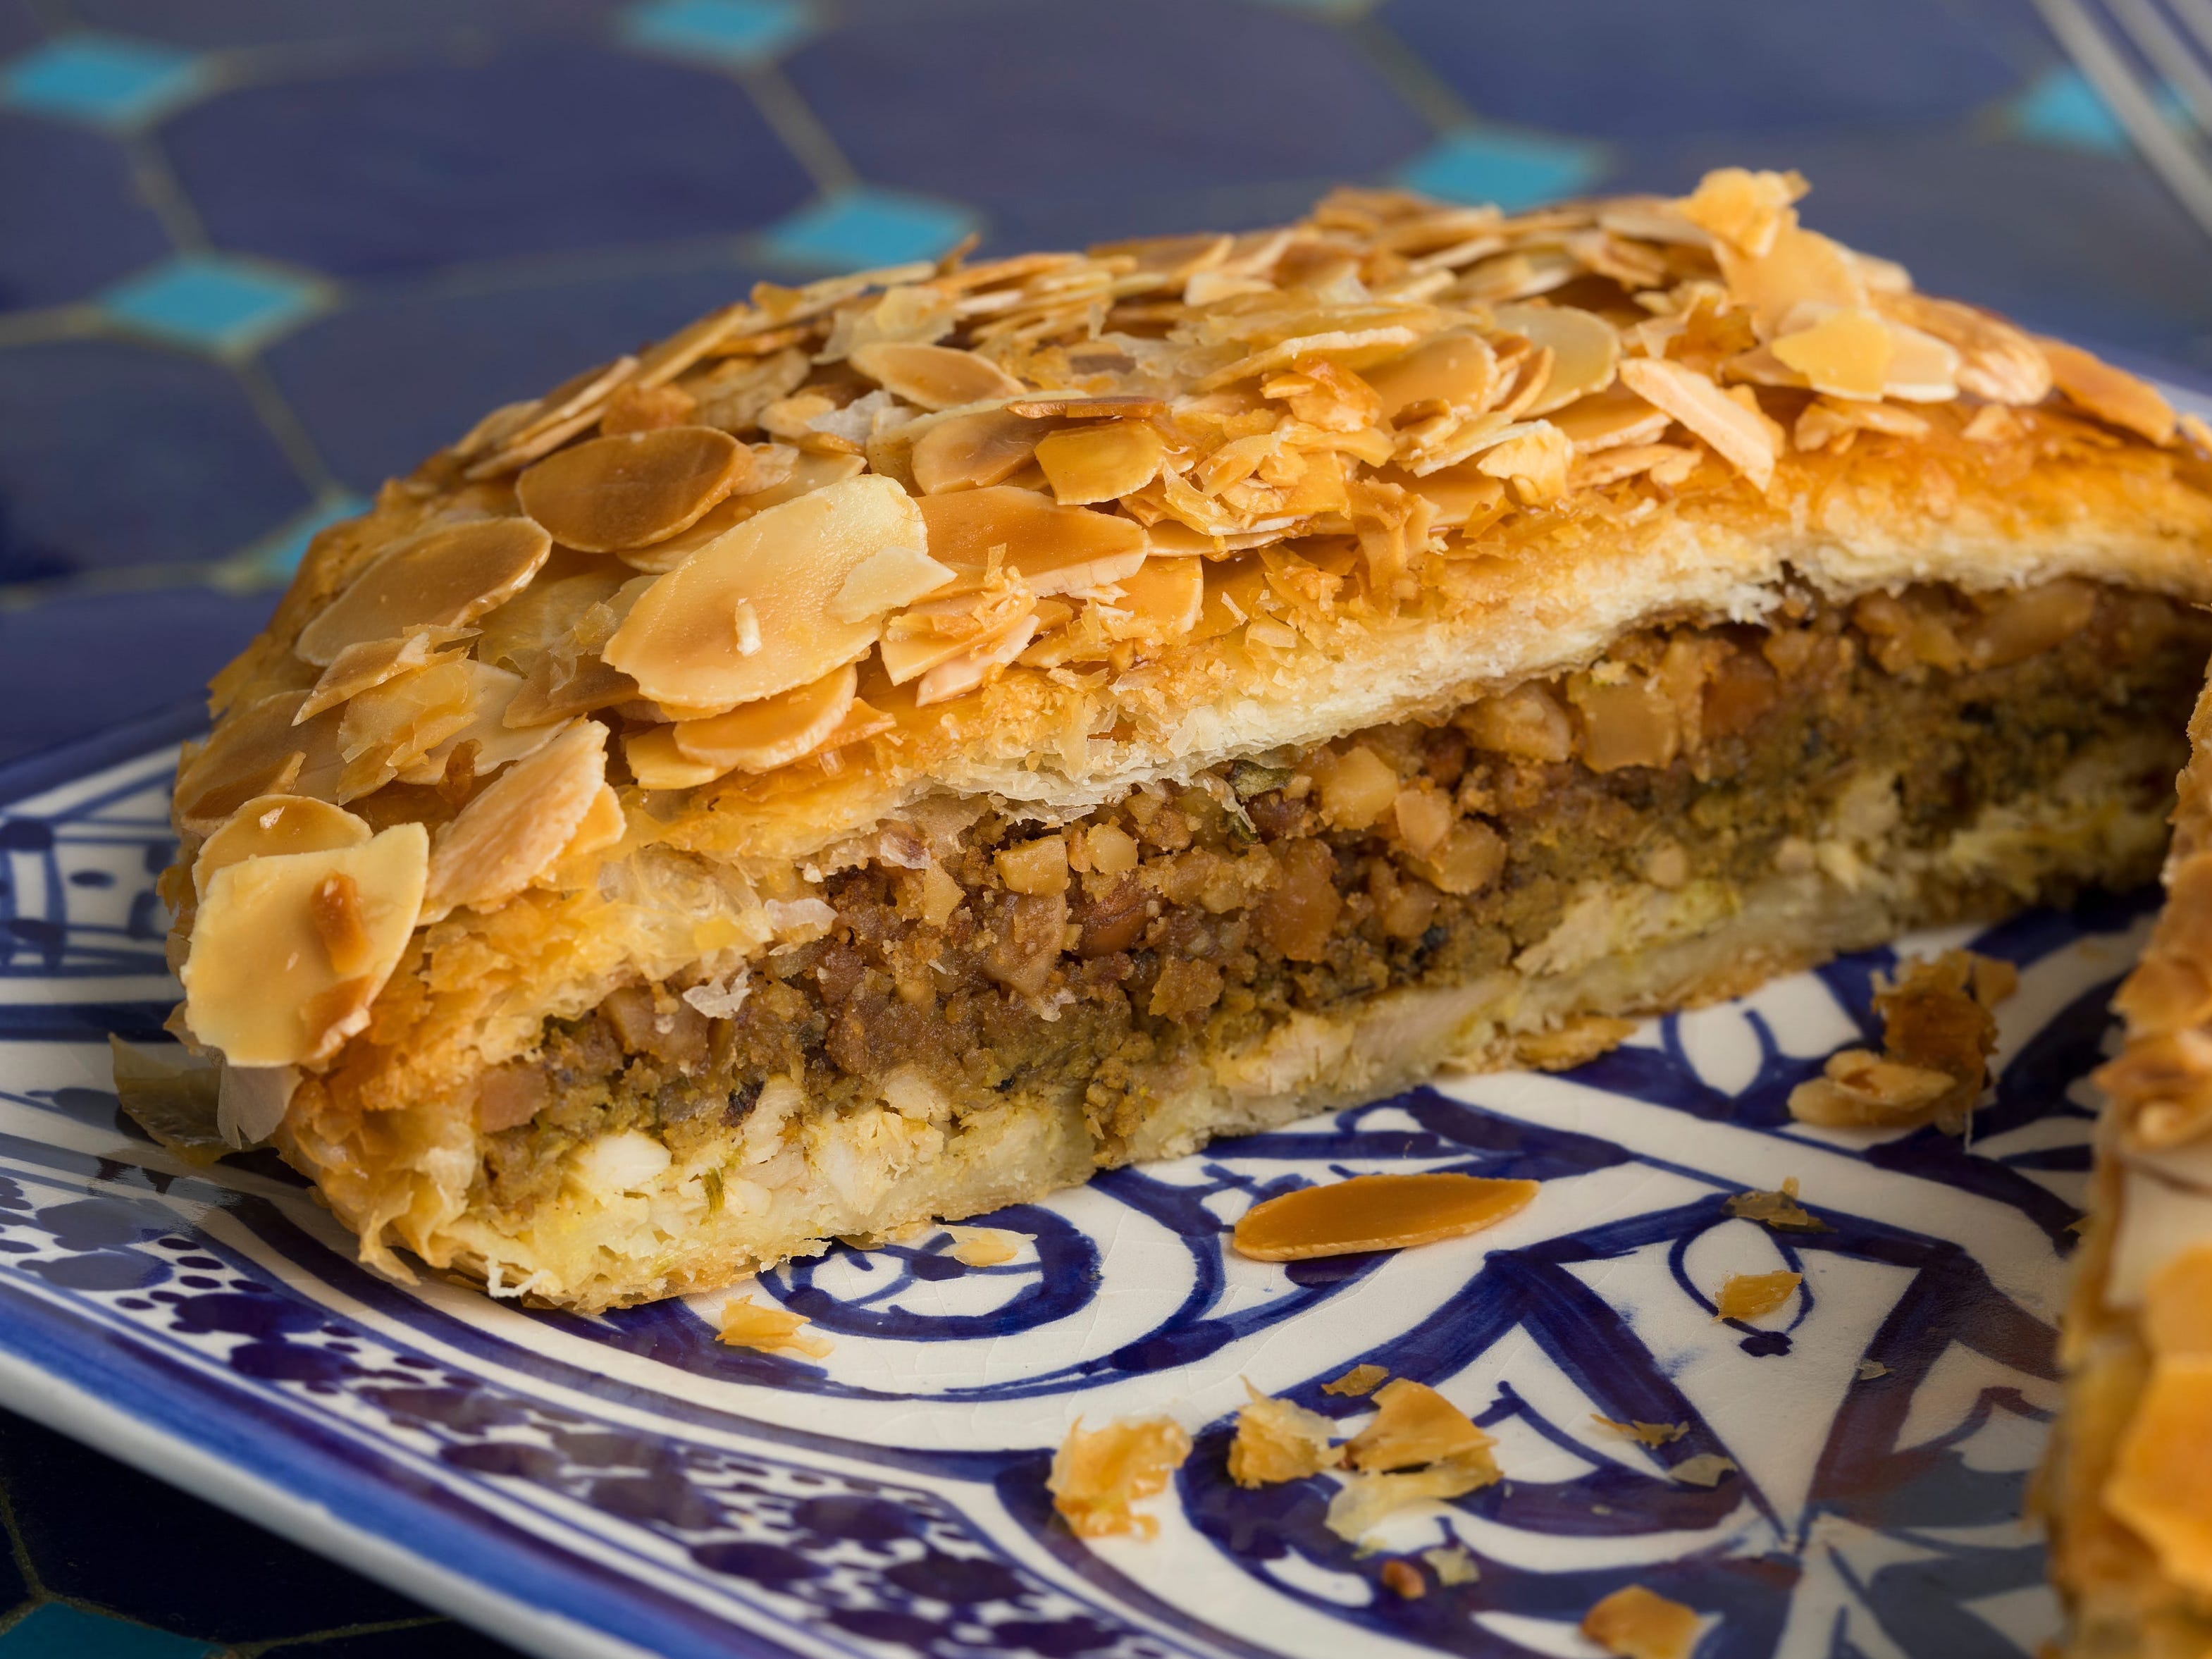 <p><a href="https://www.taste.com.au/recipes/bisteeya-moroccan-chicken-almond-filo-pie/b56bd79a-09e8-46c6-97ac-50351a4d96eb">According to Taste</a>, this crumbly phyllo-coated Morrocan dish is commonly made with spicy chicken, almonds, and eggs.</p><p>After the chicken pie is baked, it's brushed with butter and sprinkled <a href="https://www.insider.com/sugar-cut-back-diet-health-experts-2019-9">with sugar</a> and cinnamon. </p>